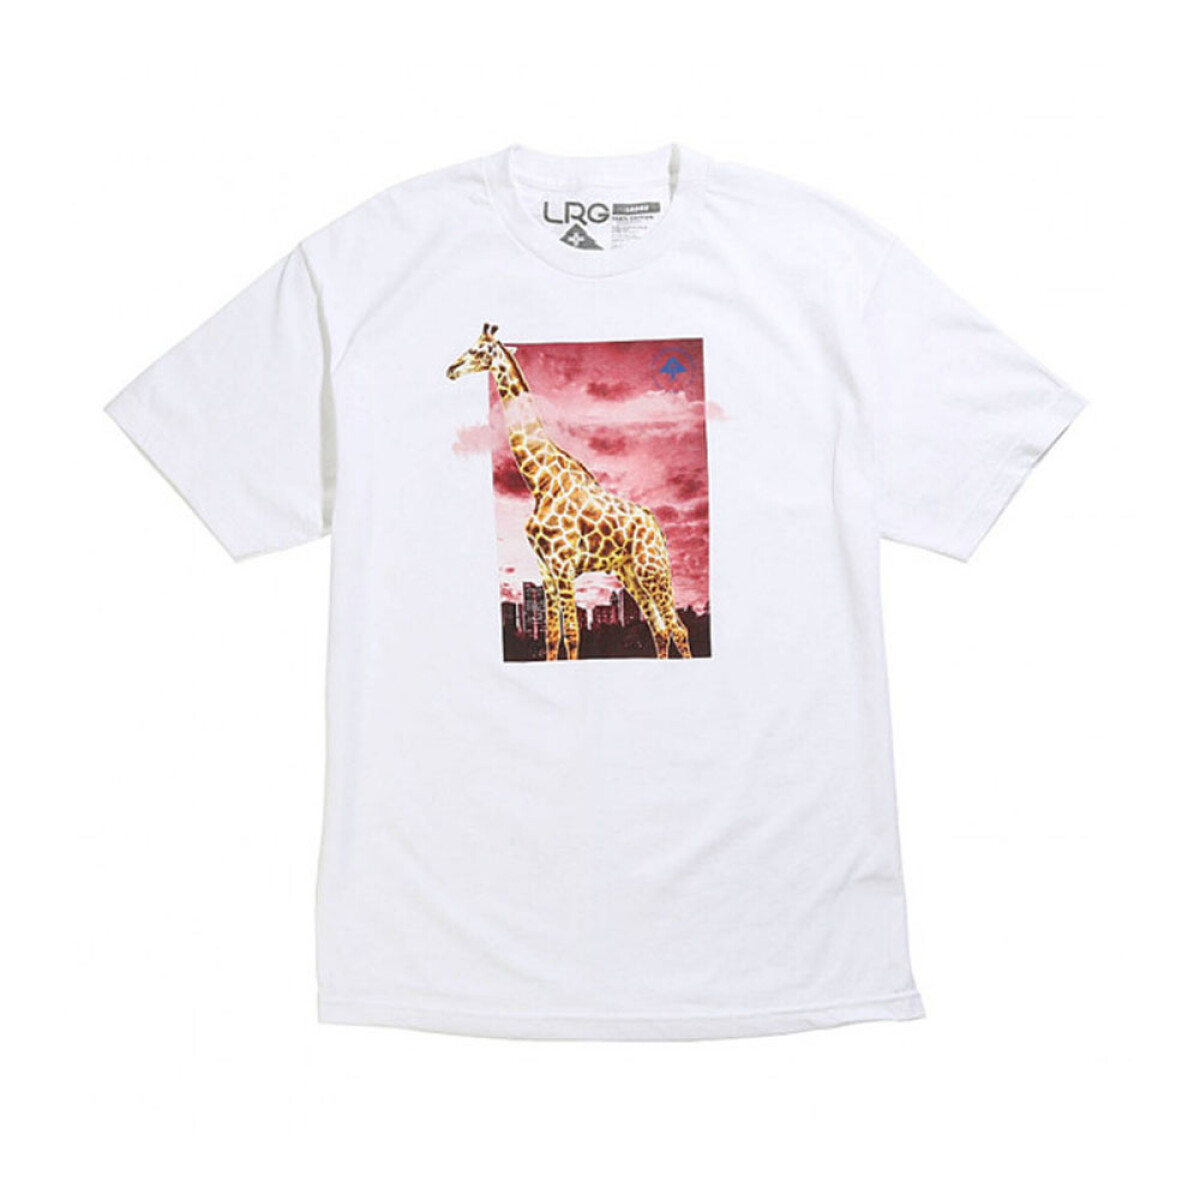 LRG HEAD IN THE CLOUDS TEE - White/Multco 